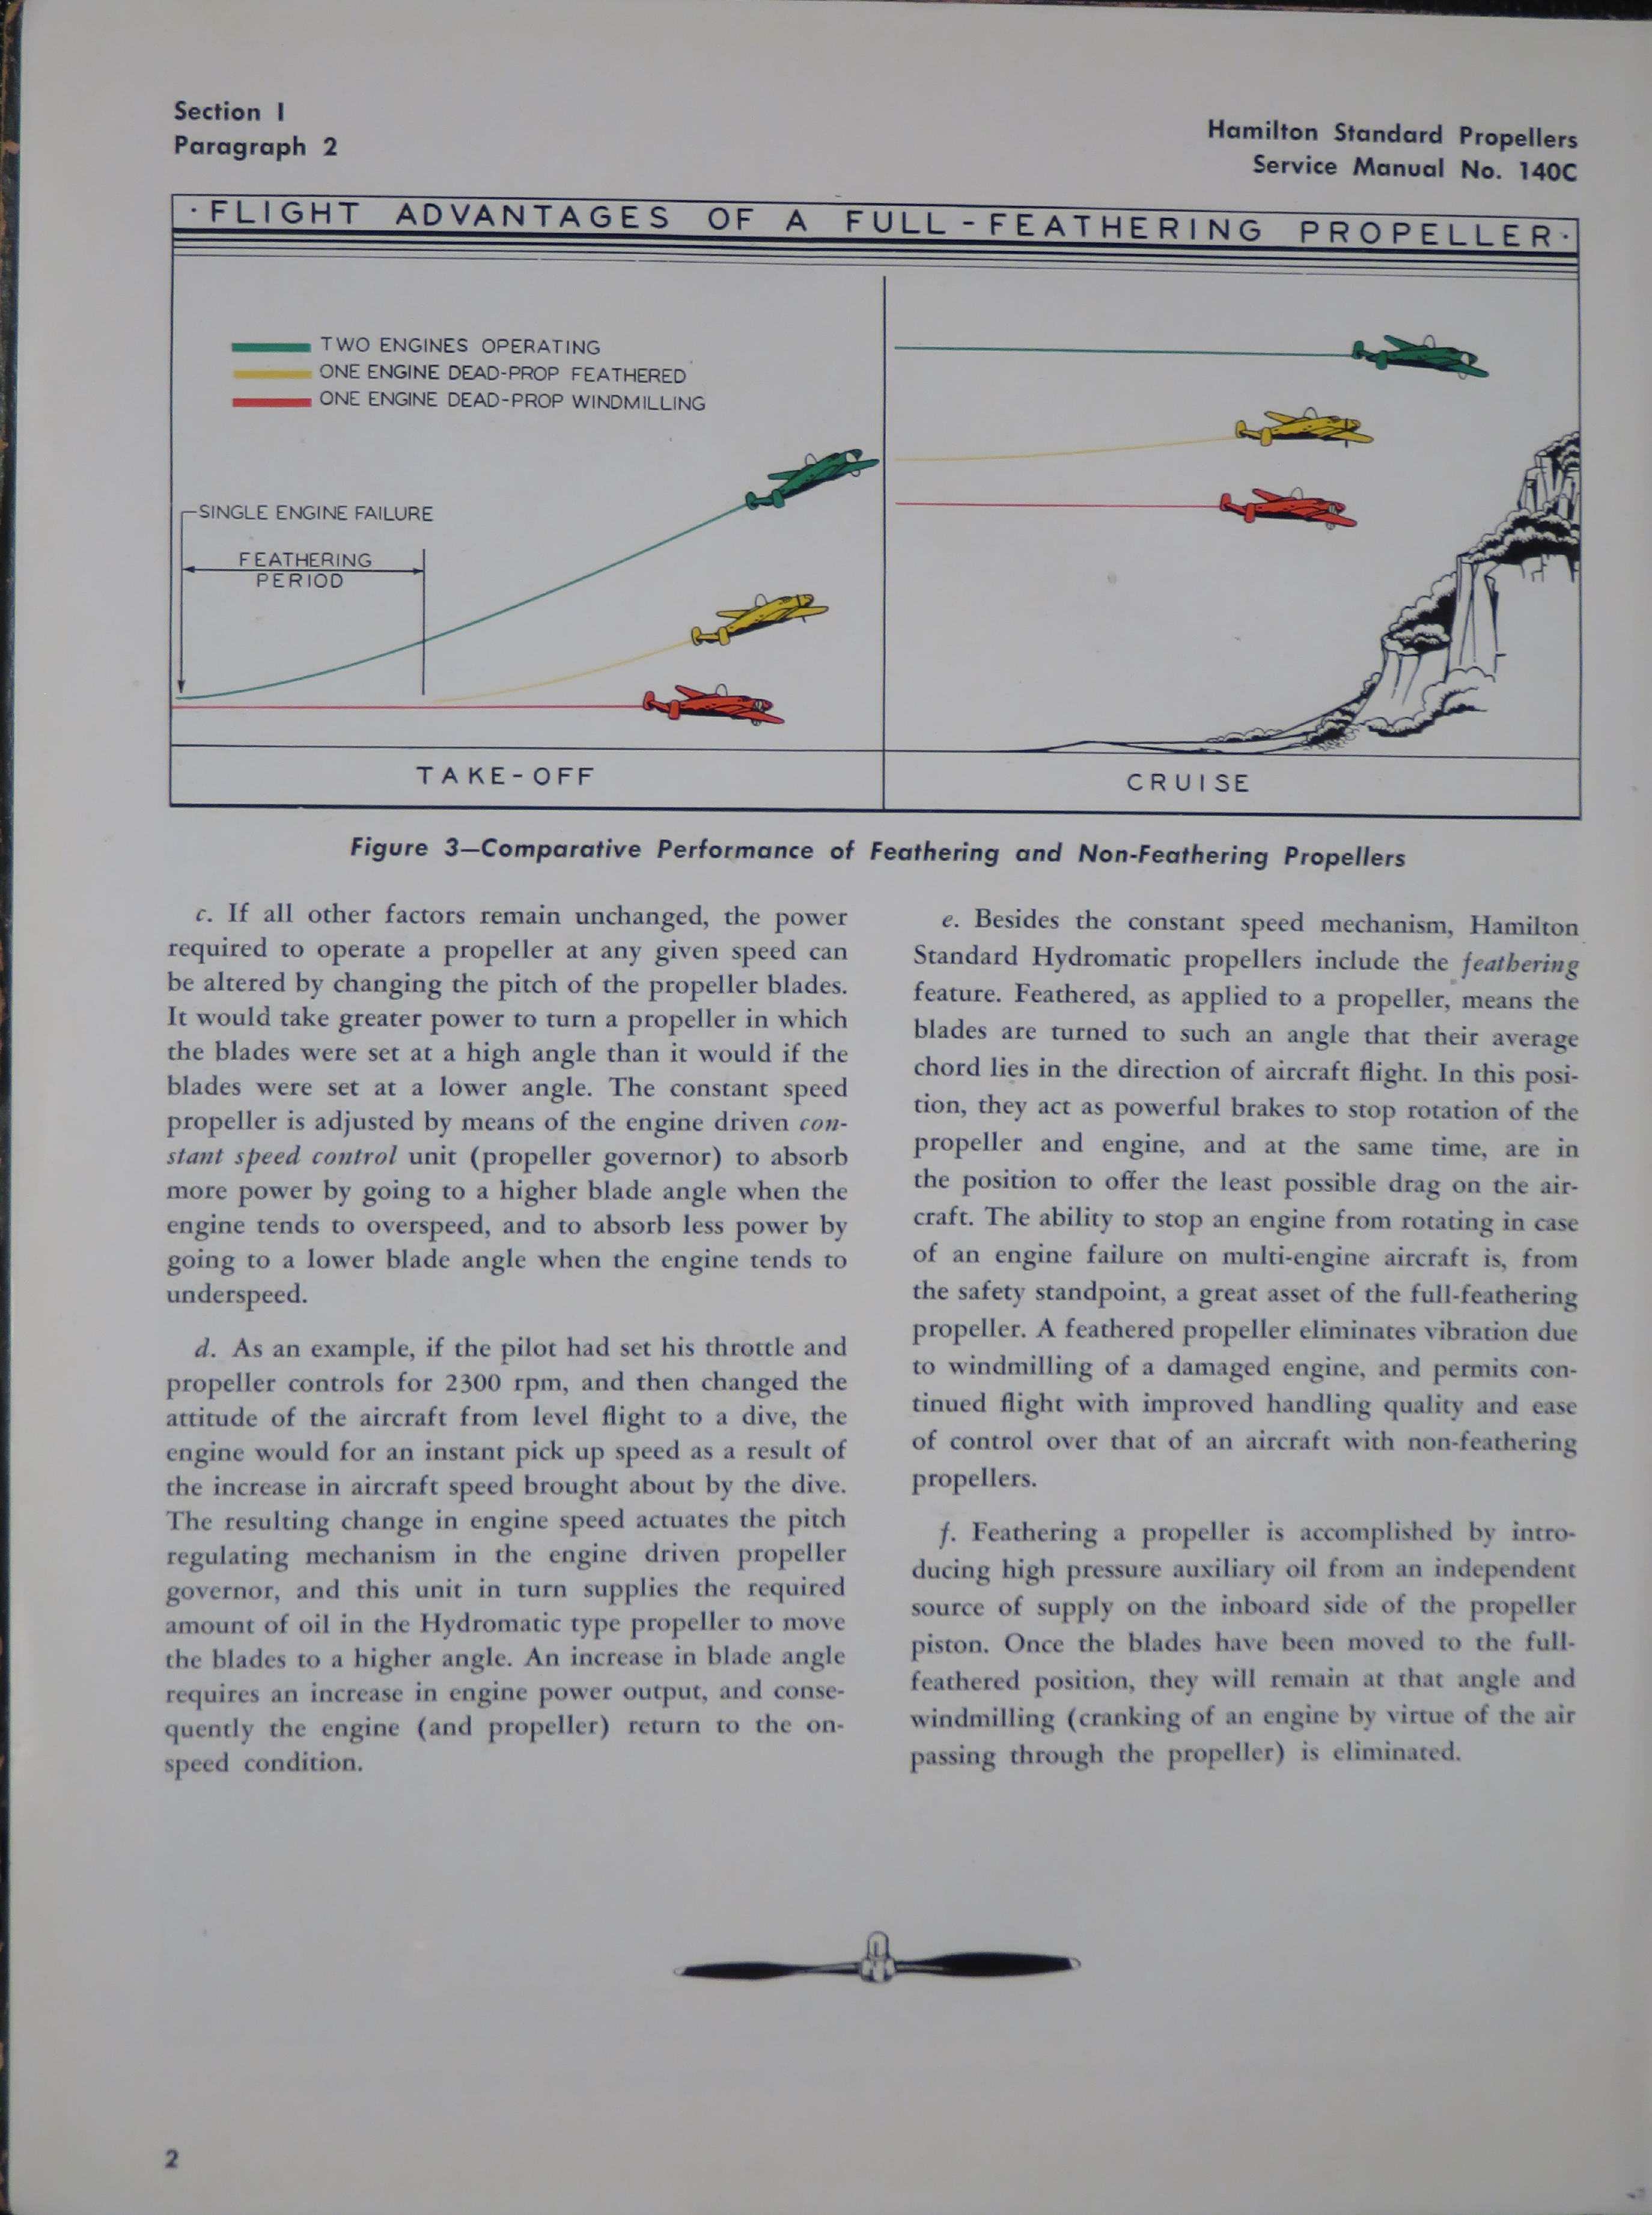 Sample page 8 from AirCorps Library document: Service Manual for Quick-Feathering Hydromatic Propellers